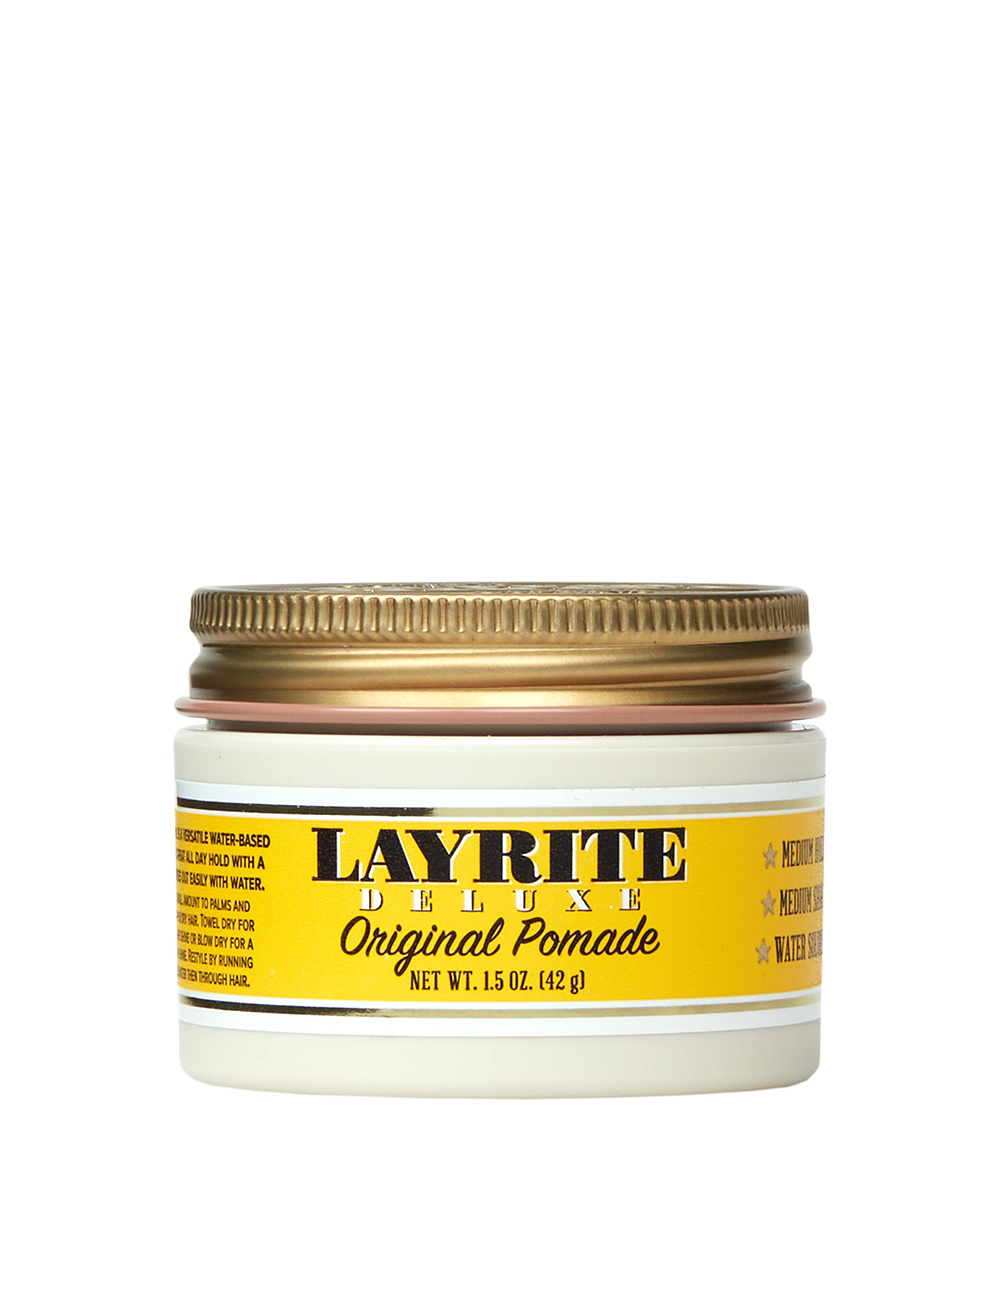 Layrite Original Pomade Travel Size Hair Styling Product